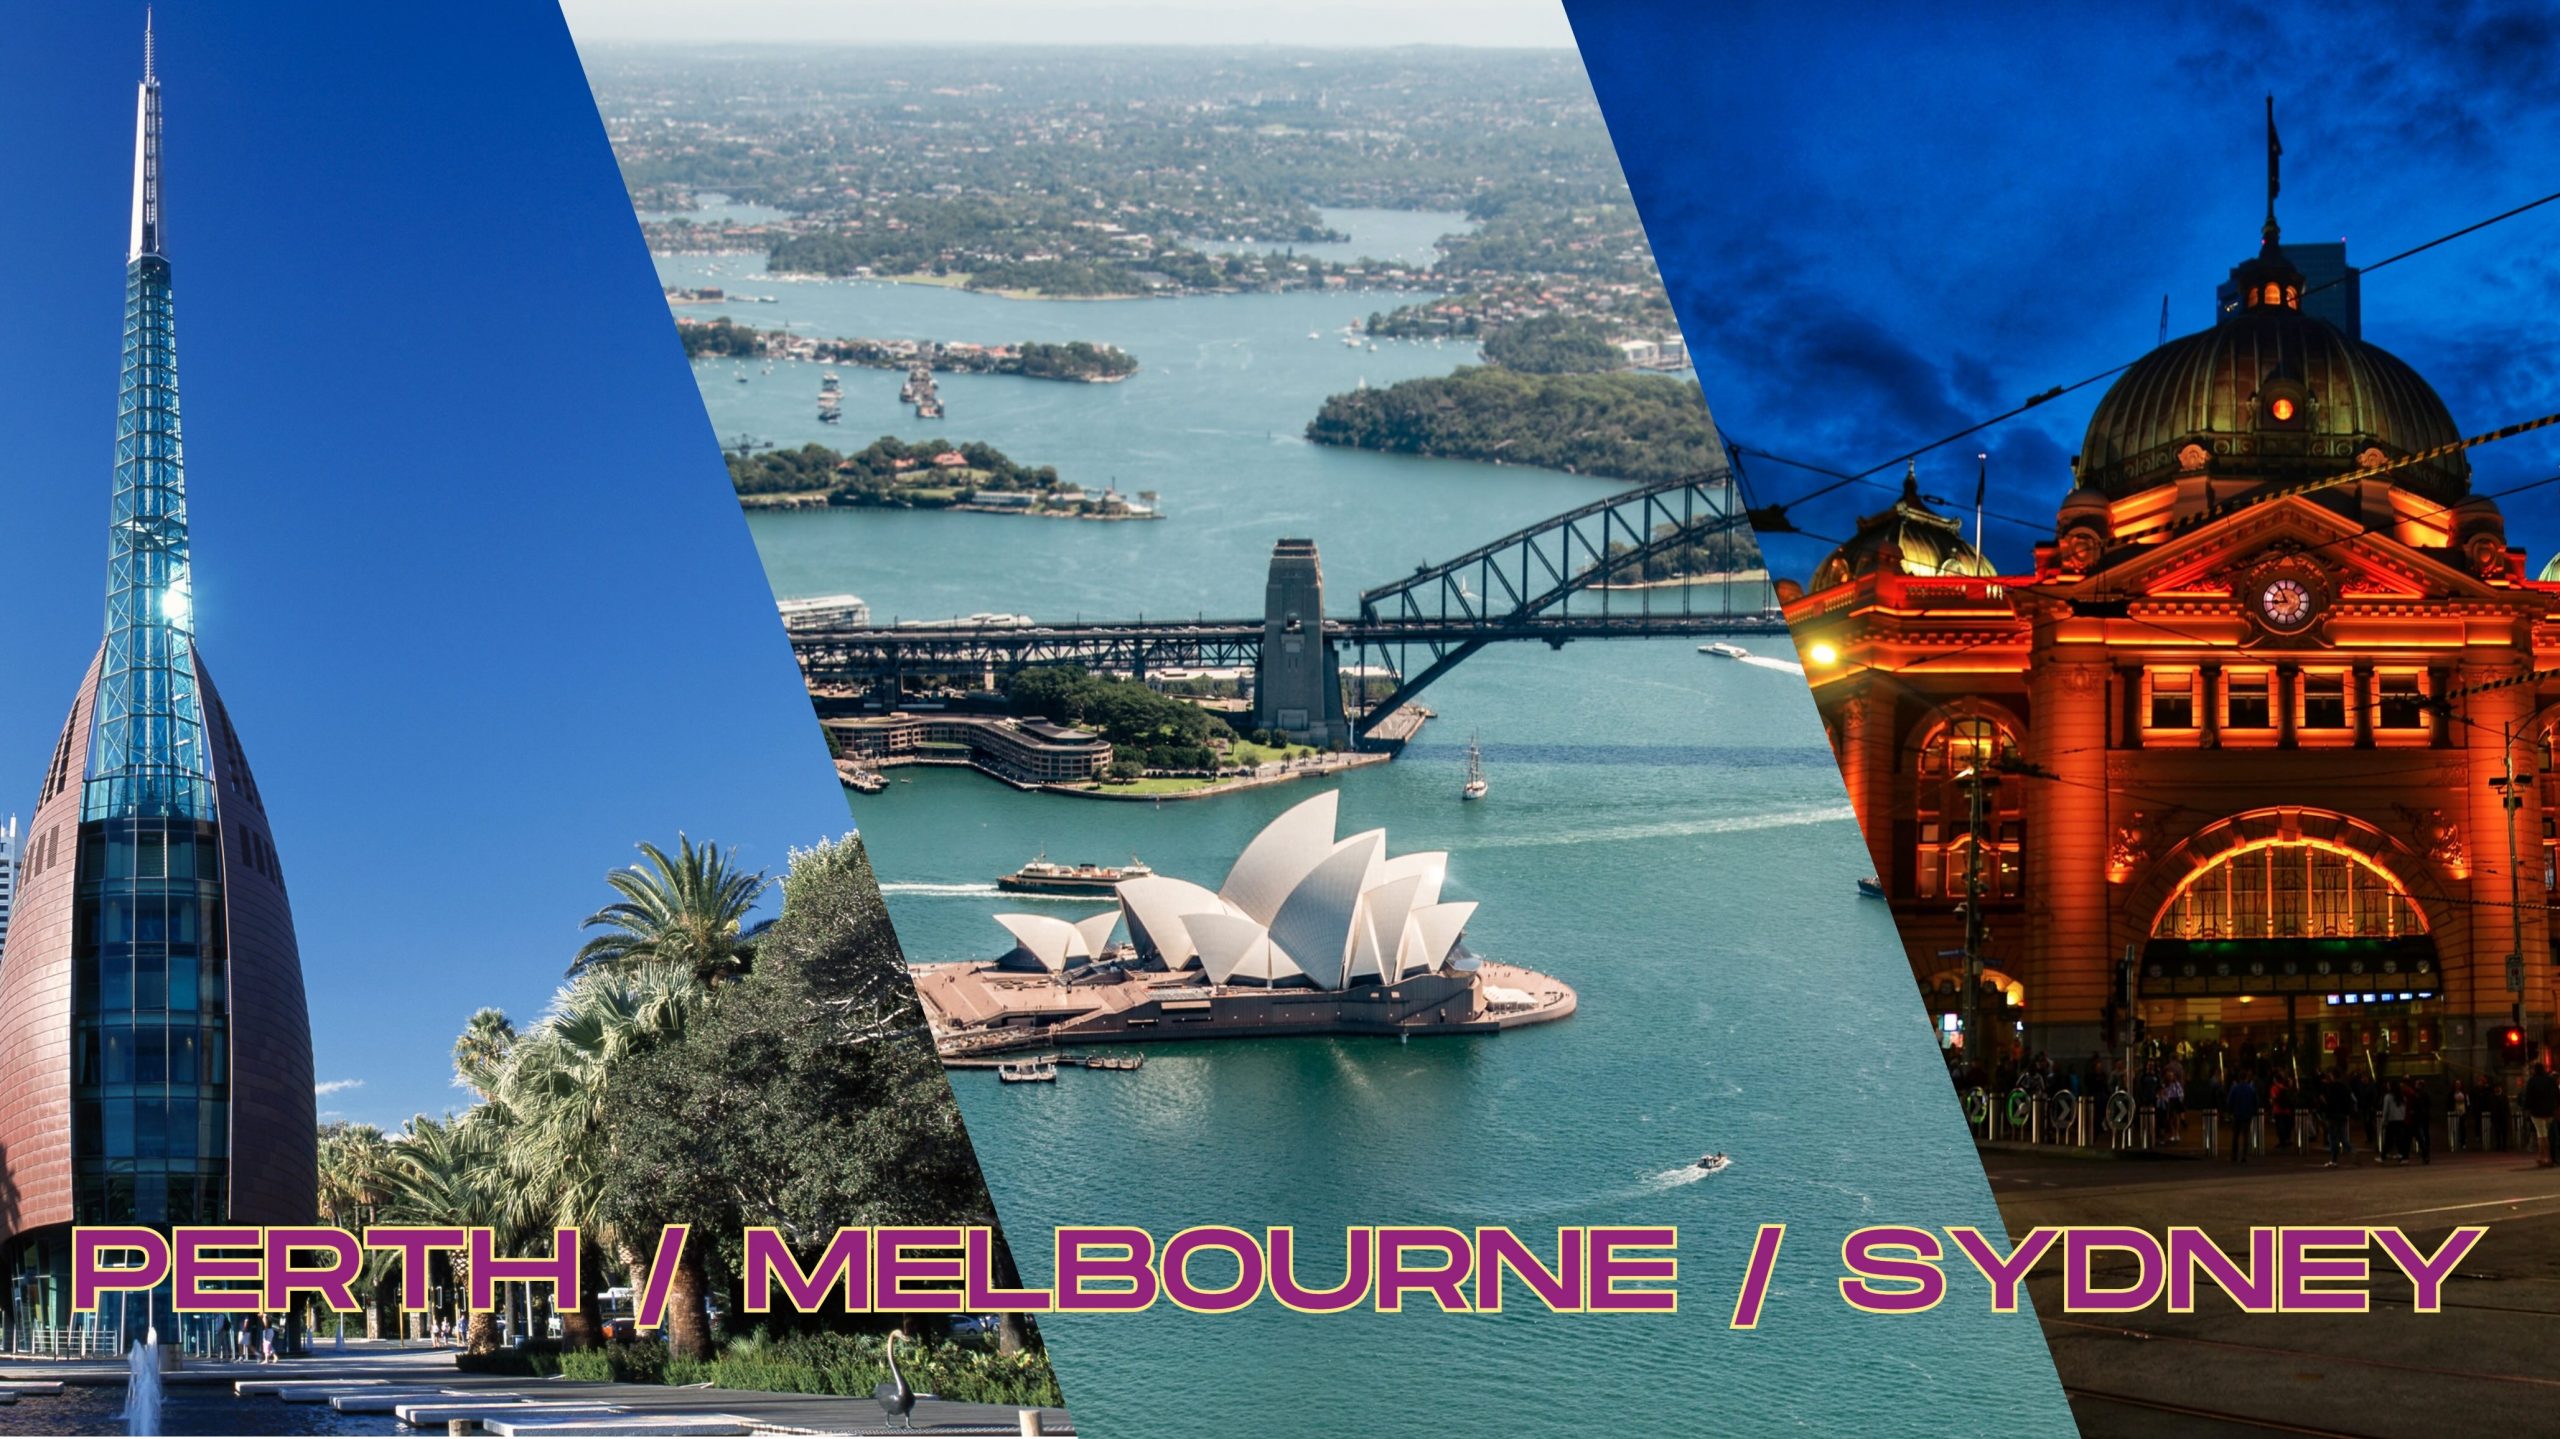 Enjoy the highlights of Australia with a Perth, Melbourne, Sydney multi-centre holiday